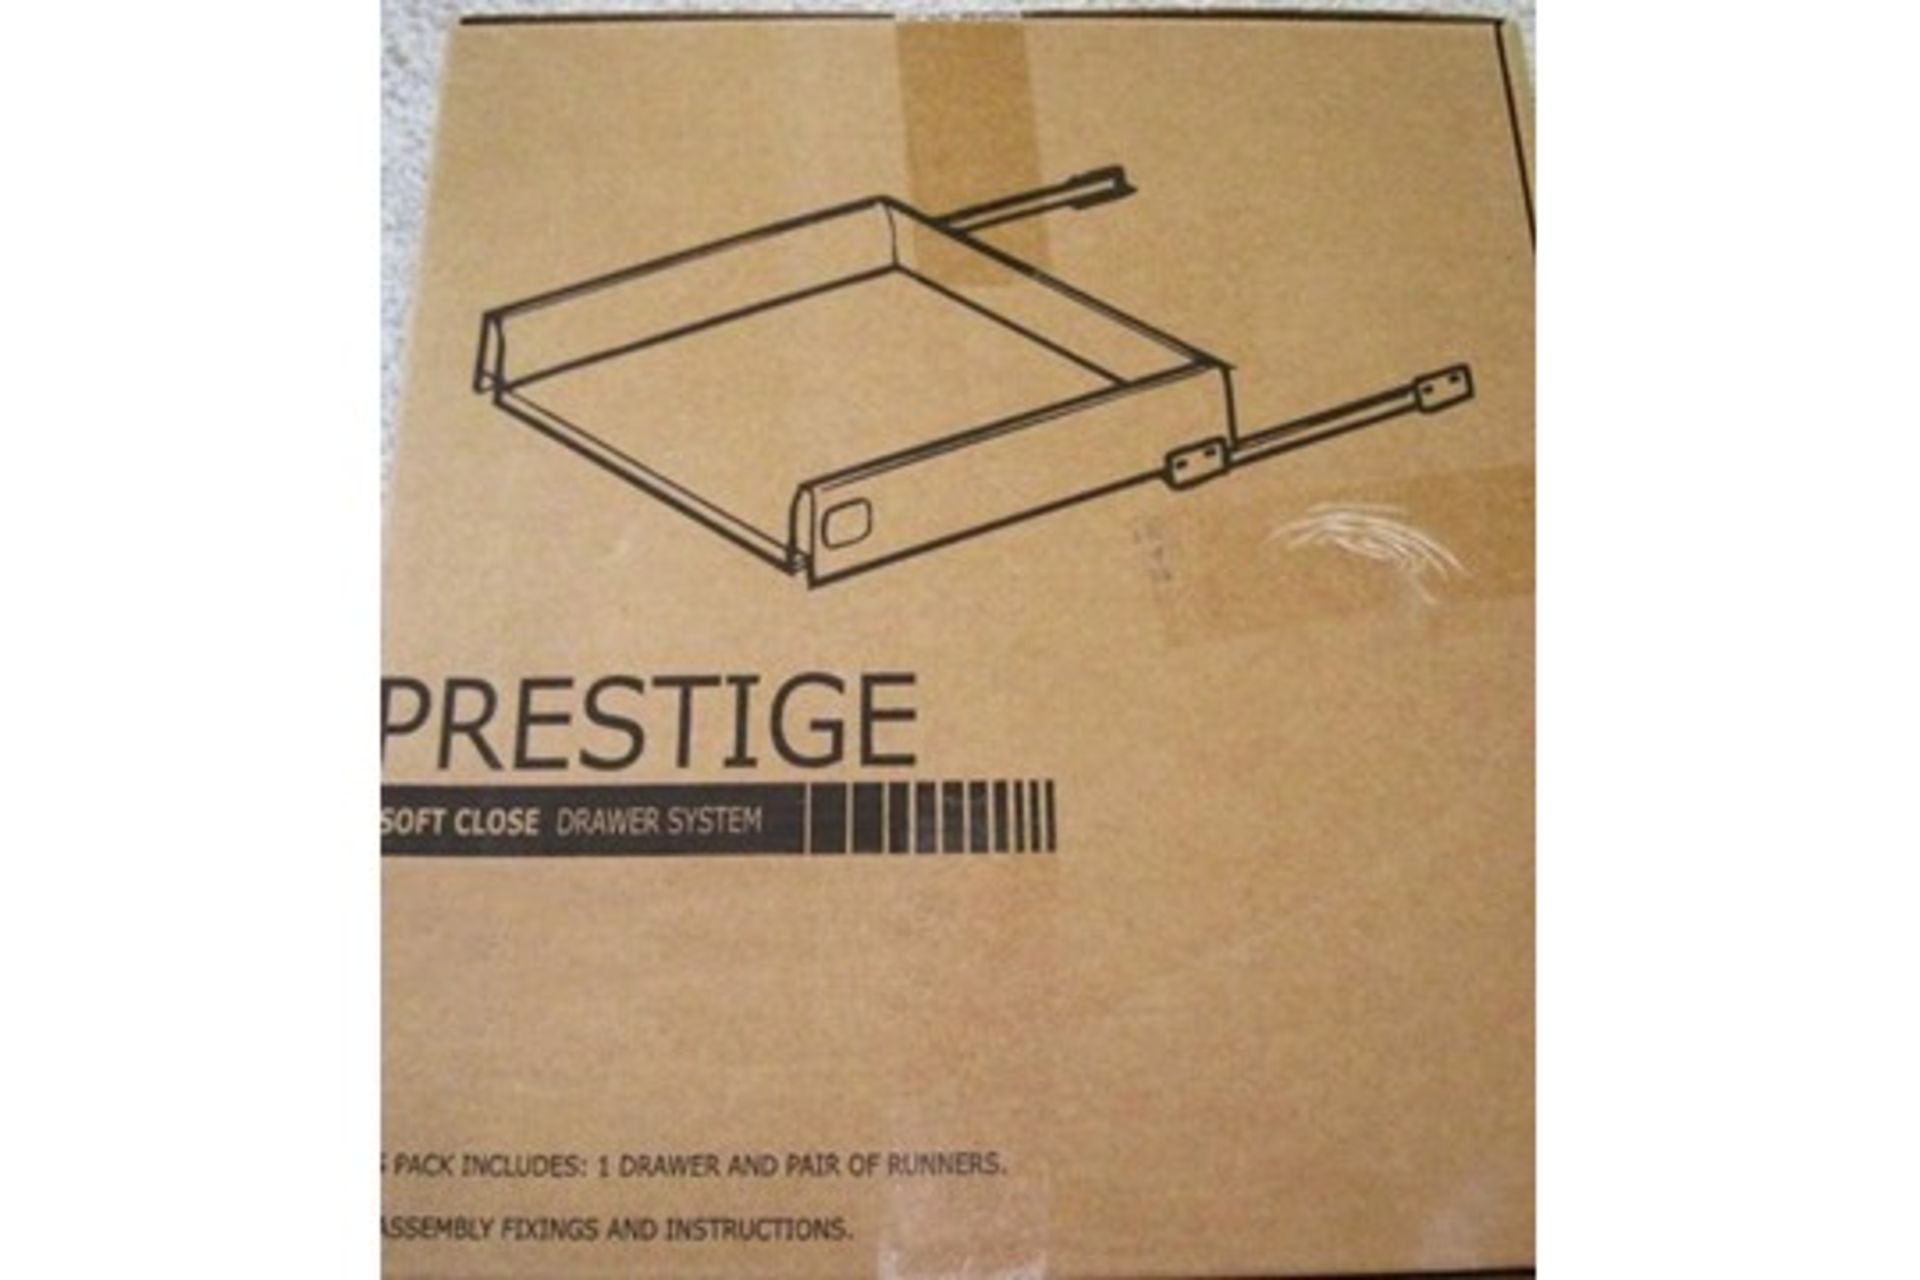 33 x Soft Close B&Q Prestige Kitchen Drawer Packs - Brand New Stock - Ideal For Kitchen Fitters or - Image 9 of 9